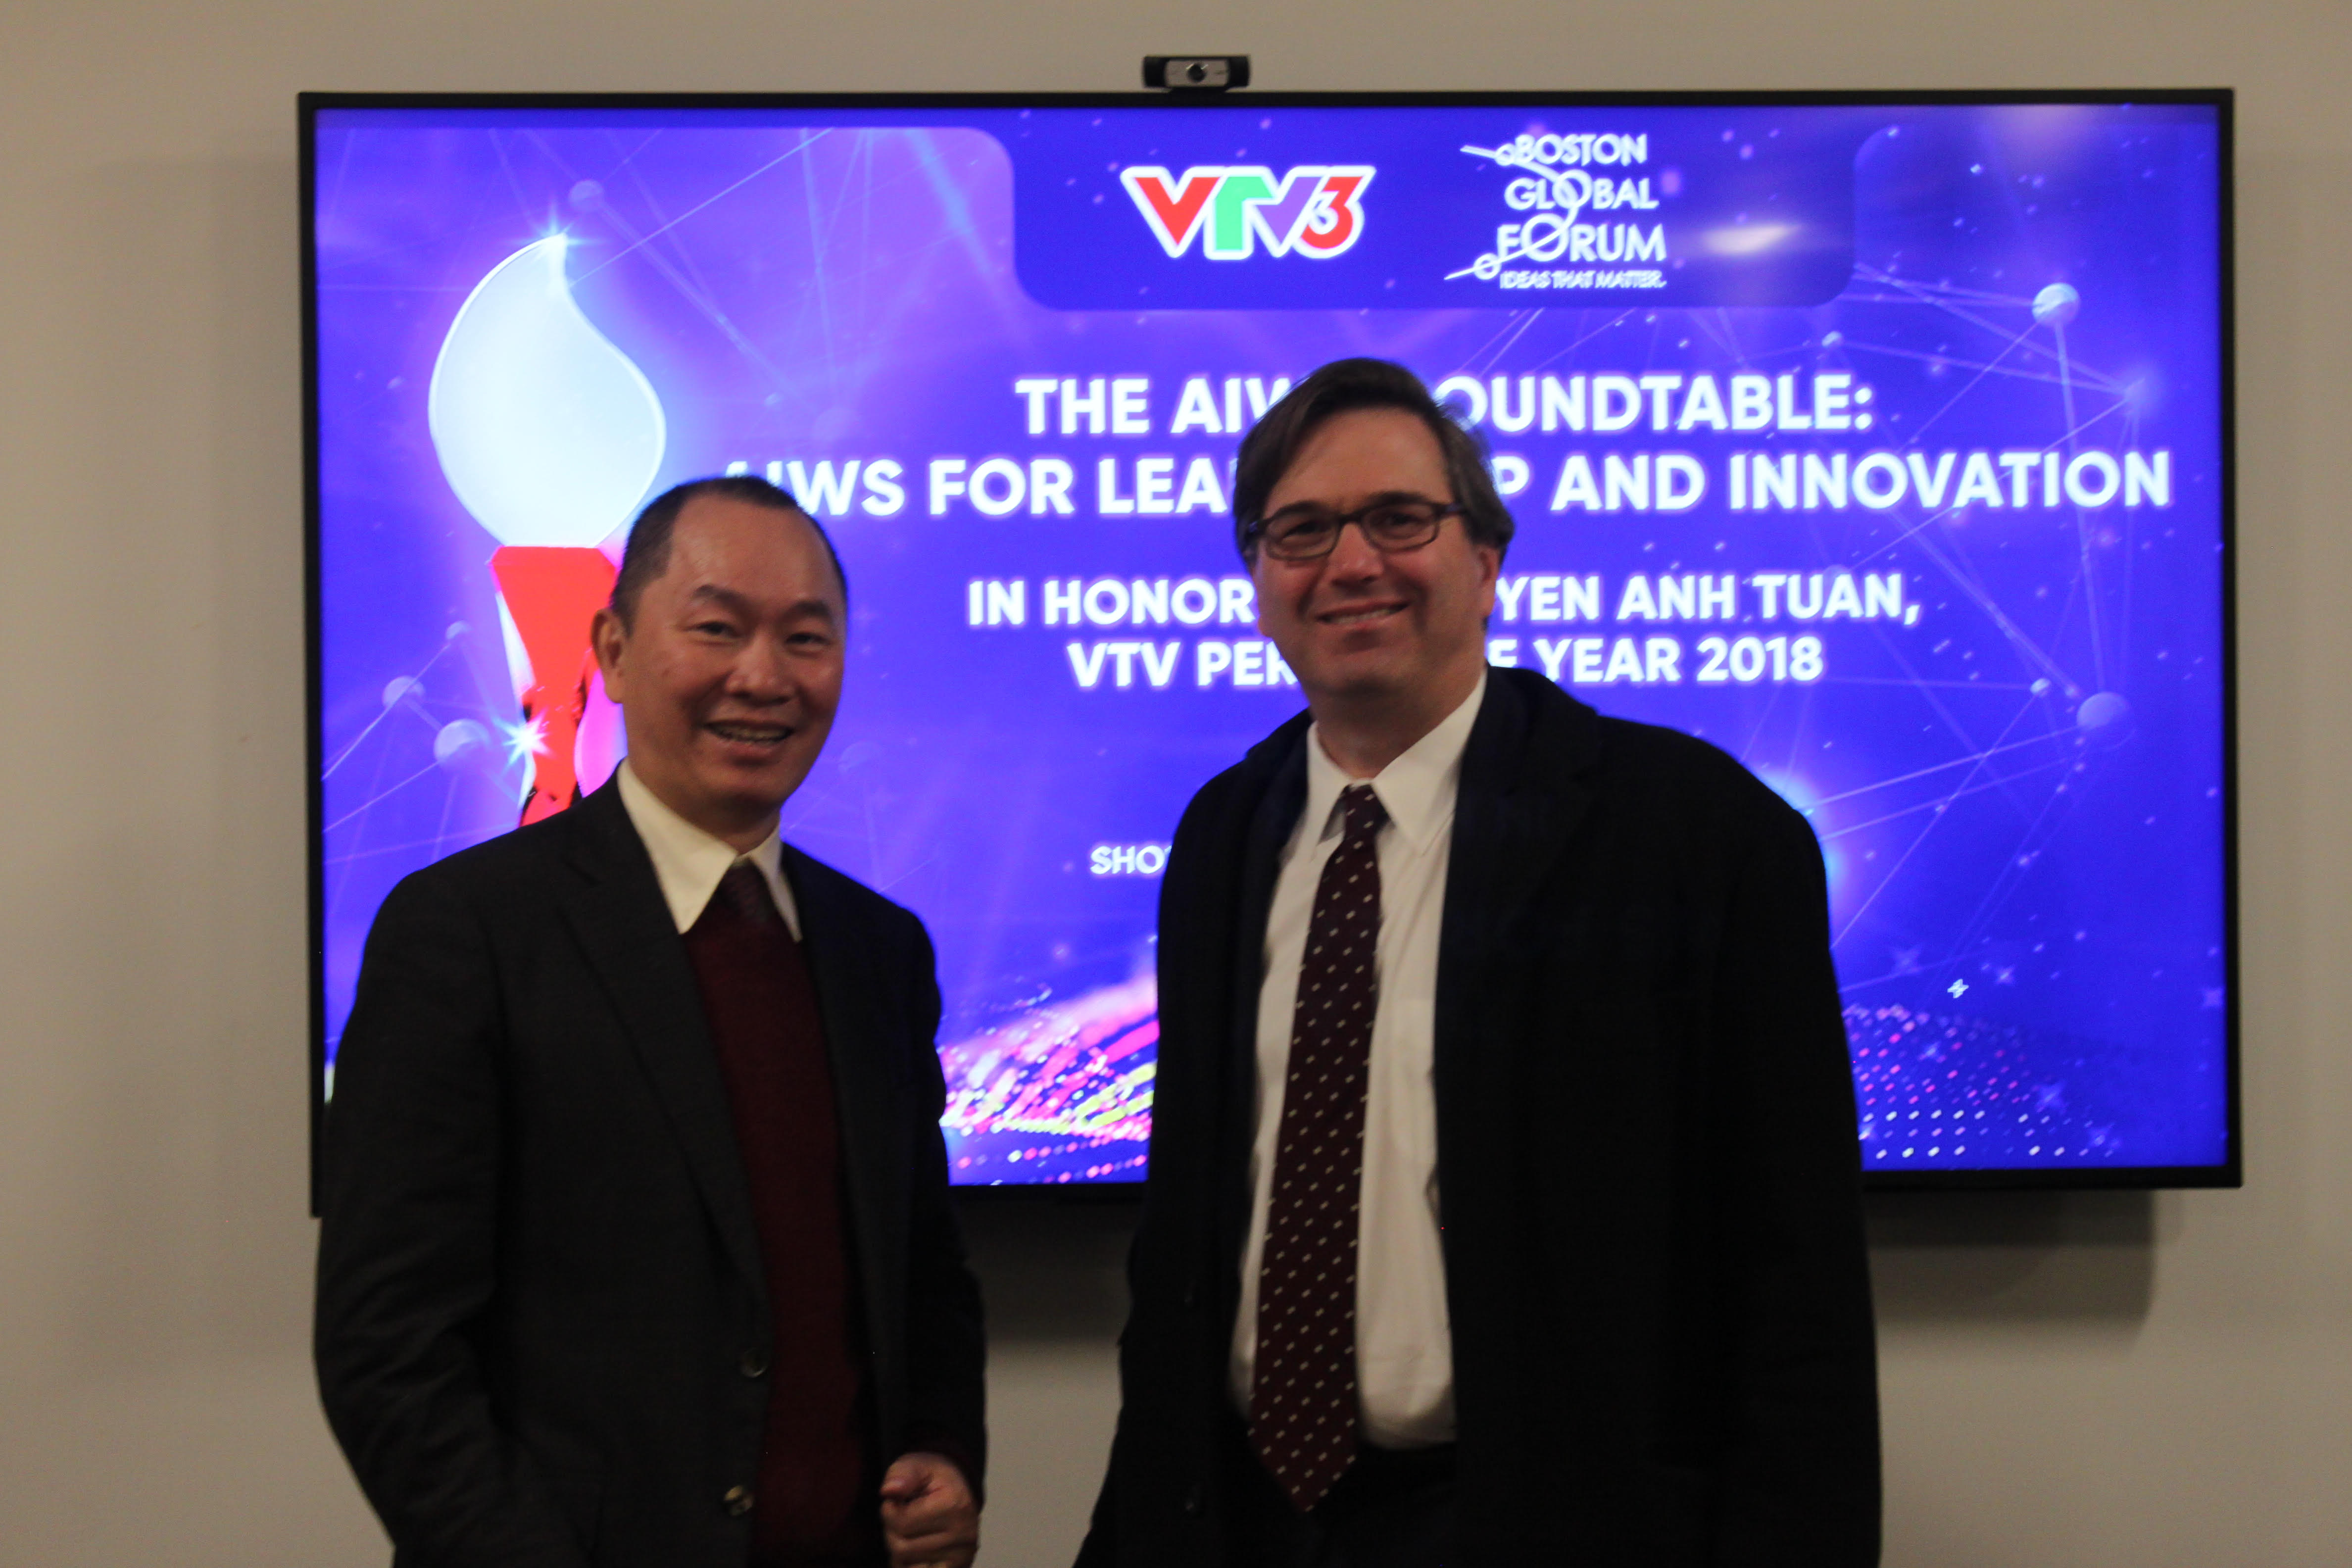 Honoring Nguyen Anh Tuan as VTV Person of Year 2018 in AIWS Roundtable on Jan 17, 2019